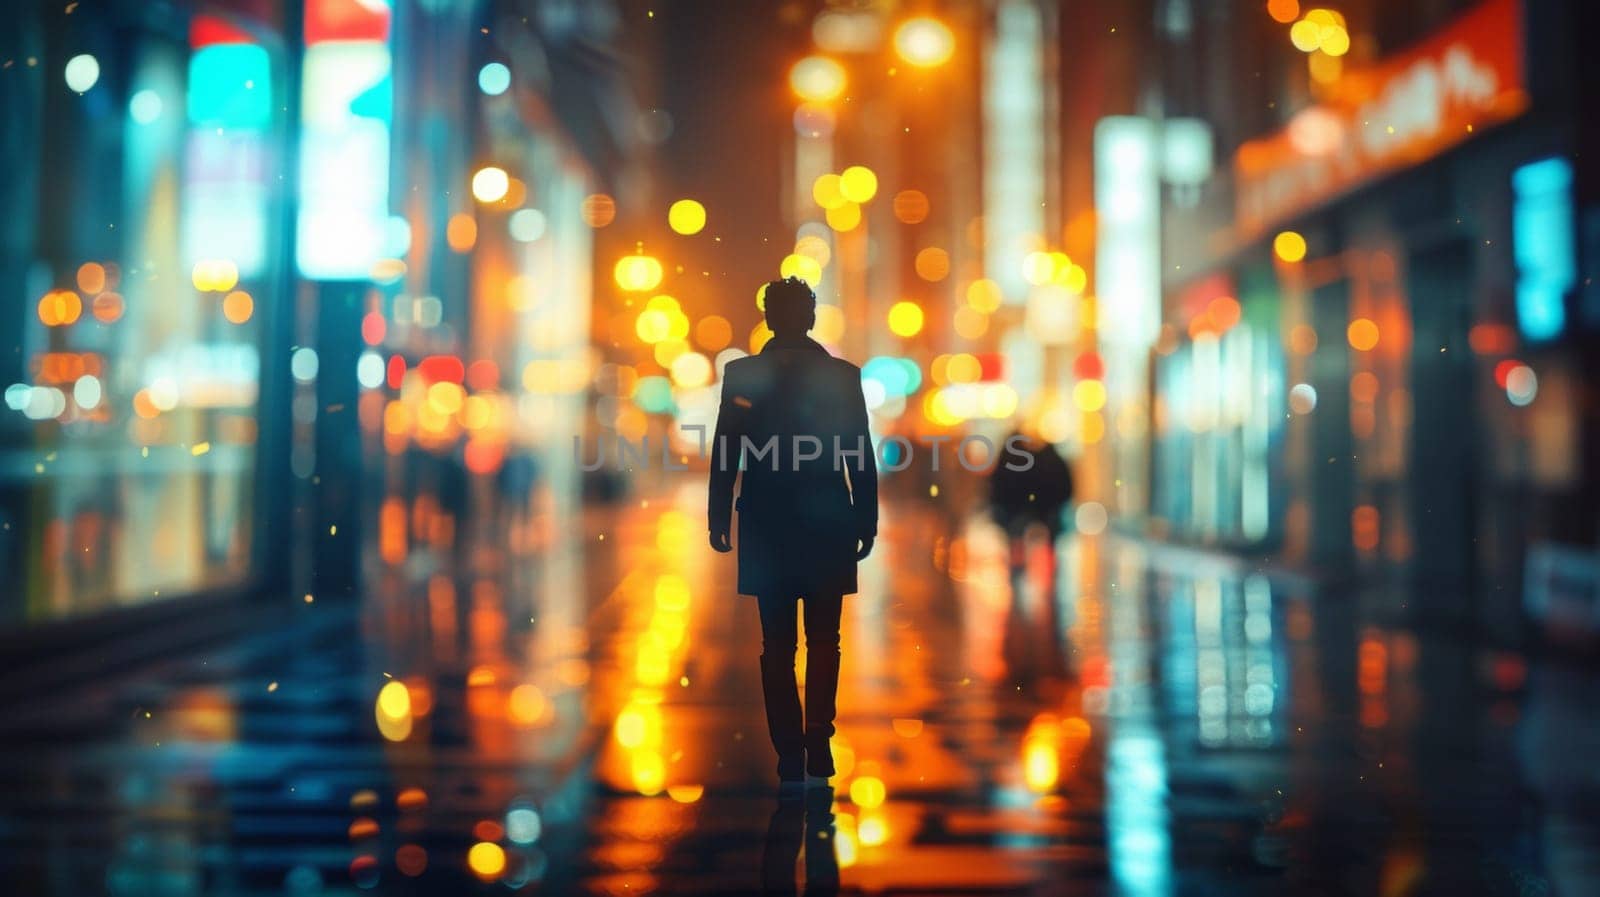 A person walking down a city street at night with lights